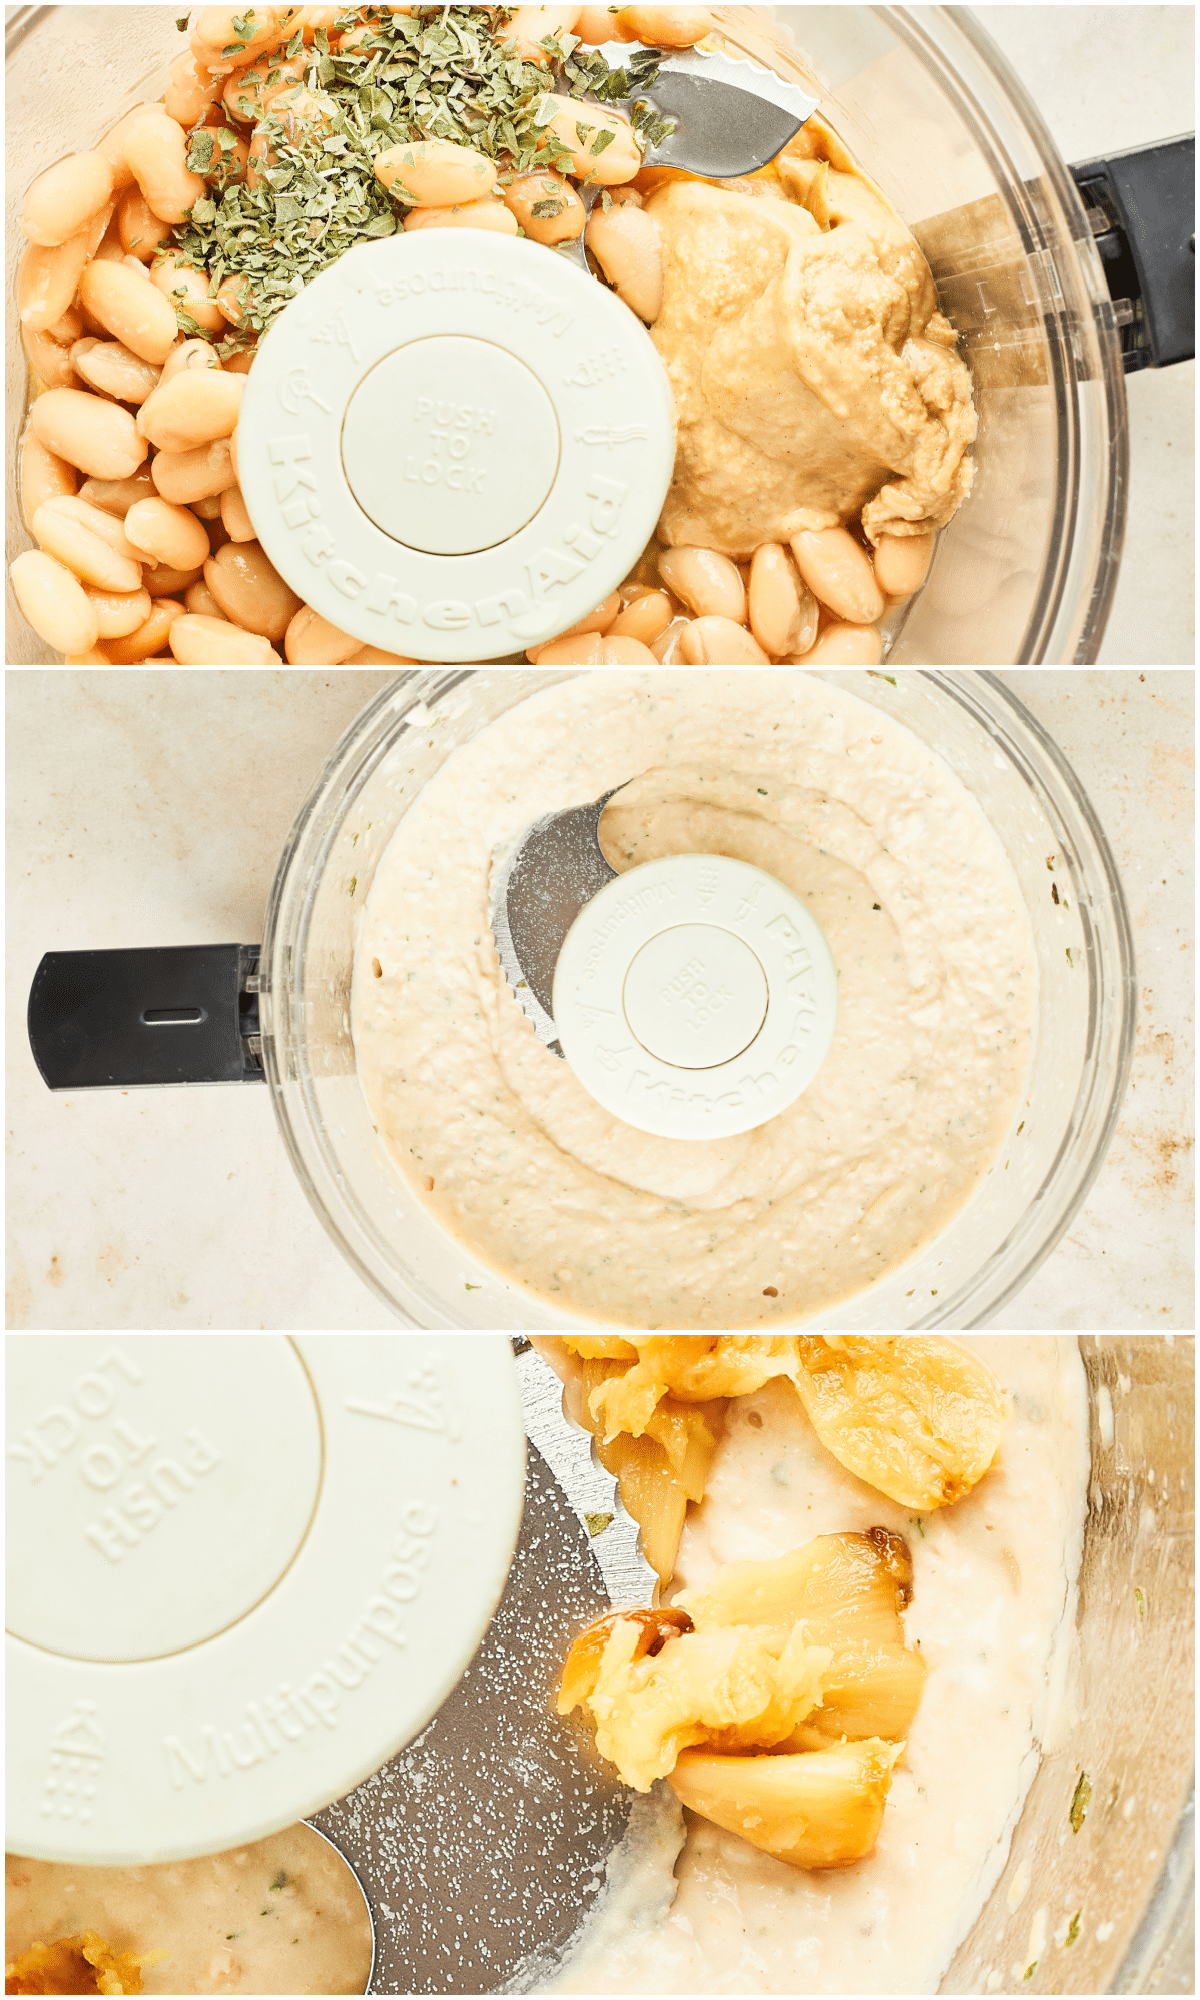 A three image collage shows how to make roasted garlic white bean dip: add beans, tahini, herbs, spices, and lemon to a food processor. Blend until smooth, add roasted garlic, blend again until smooth.